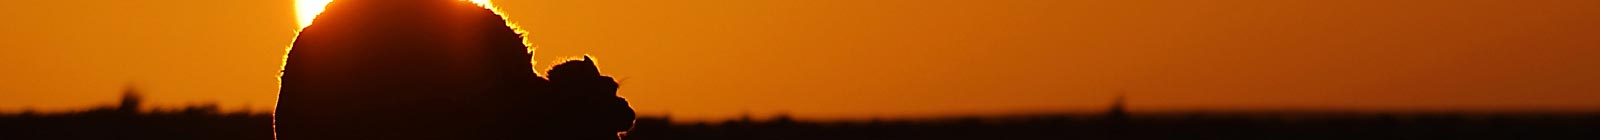 Camel escaping into orange sunset.